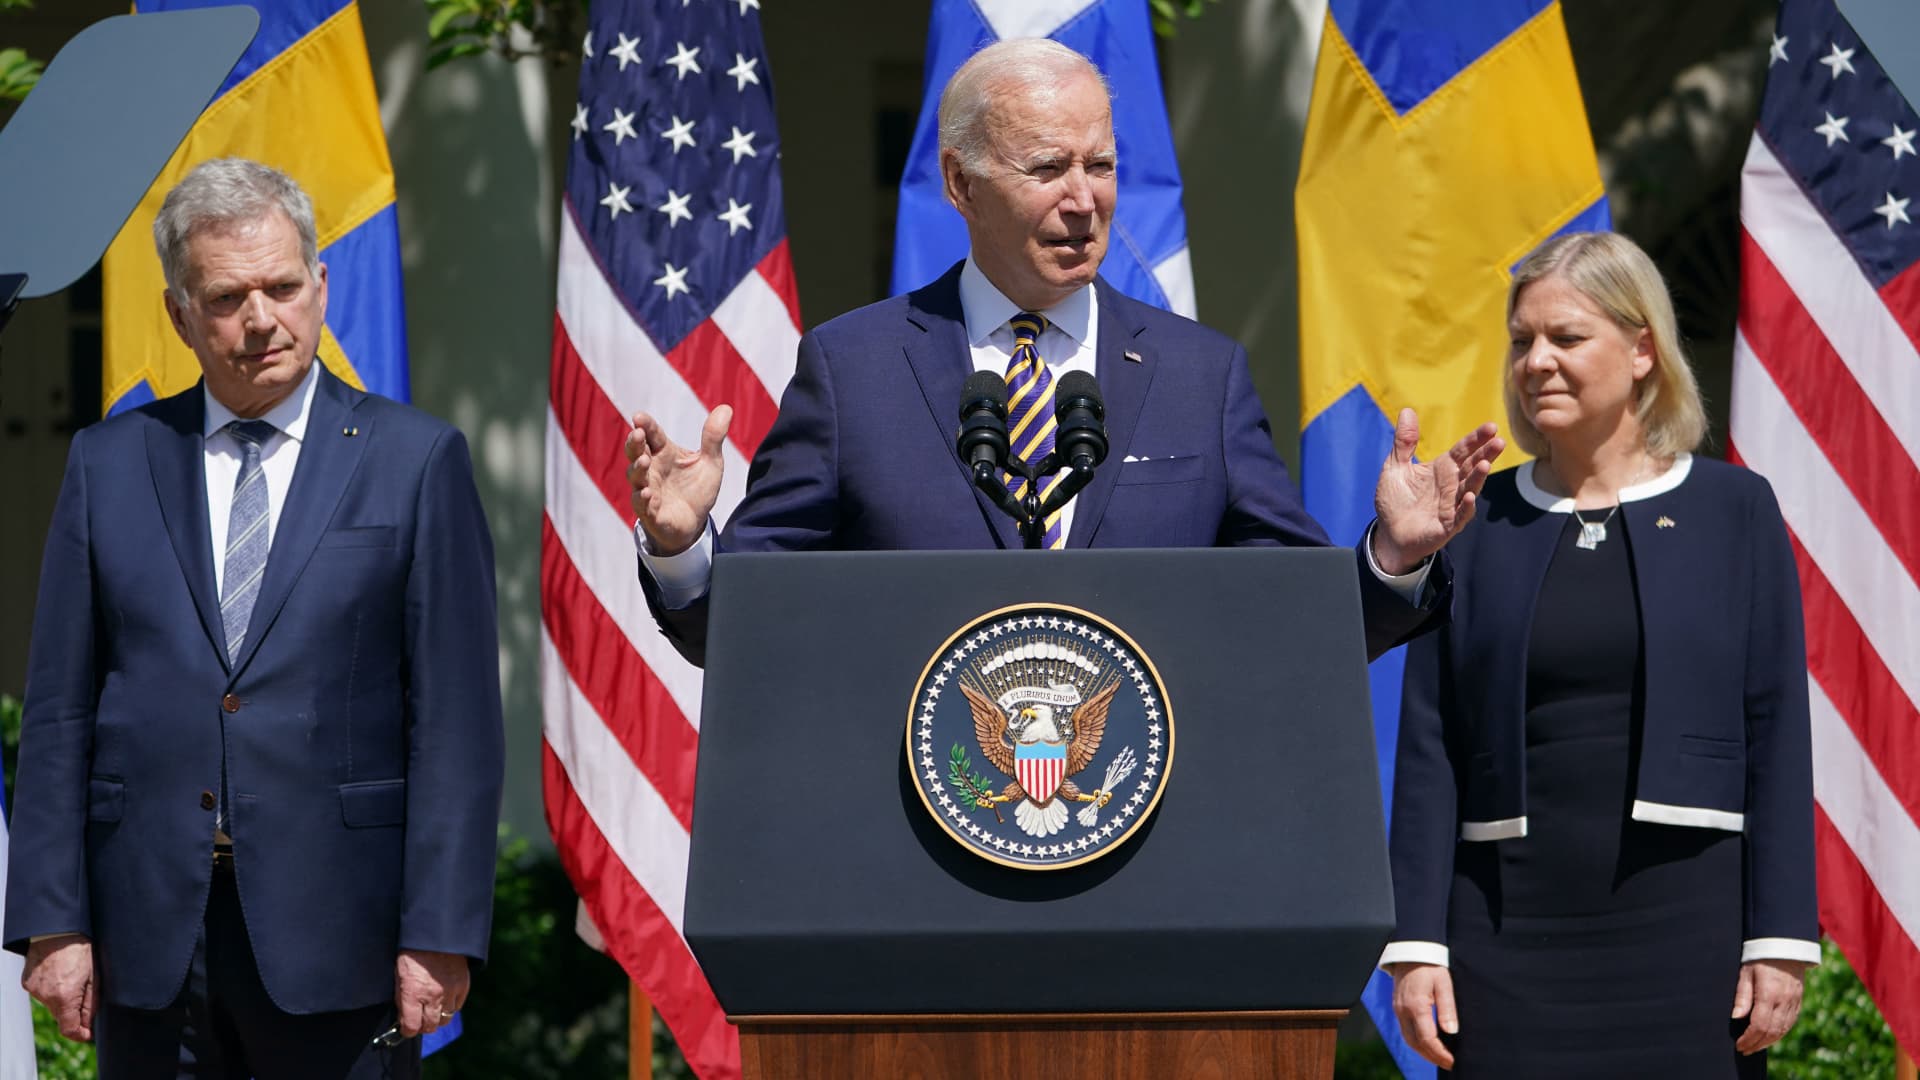 US President Joe Biden, flanked by Swedens Prime Minister Magdalena Andersson and Finlands President Sauli Niinistö, speaks in the Rose Garden following a meeting at the White House in Washington, DC, on May 19, 2022.